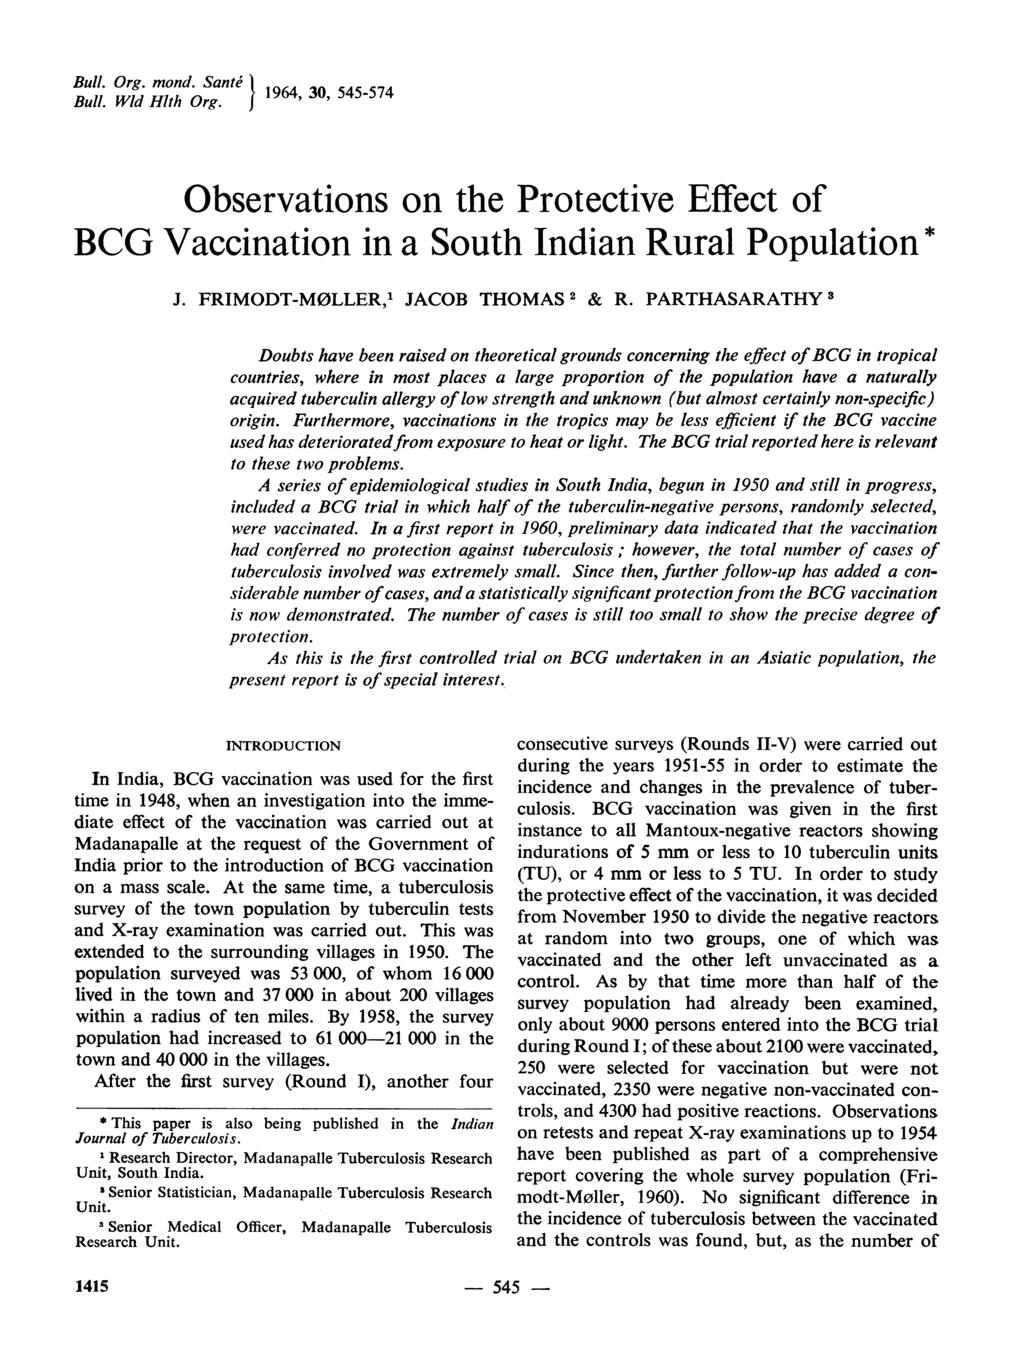 Bull. Org. mond. Sante 11964, 30, 545-574 Bull. Wld Hlth Org. i Observations on the Protective Effect of BCG Vaccination in a South Indian Rural Population* J. FRIMODT-M0LLER,' JACOB THOMAS 2 & R.